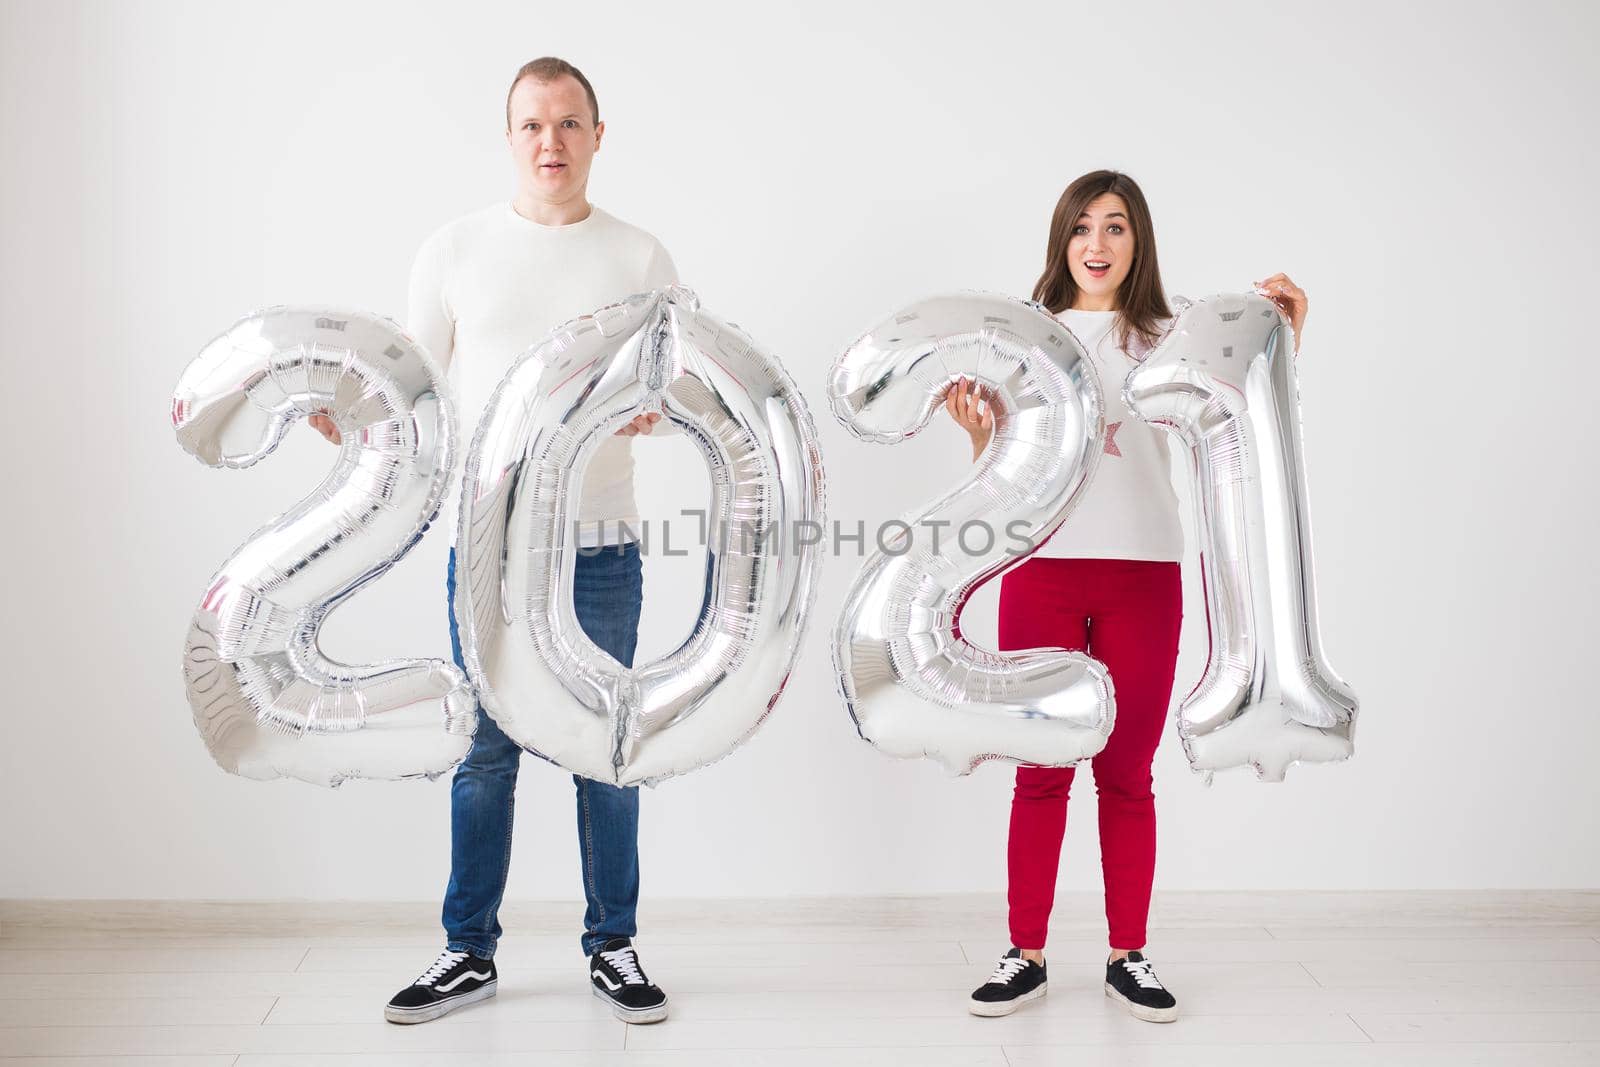 New 2021 Year is coming concept - Happy young man and woman are holding silver colored numbers indoors